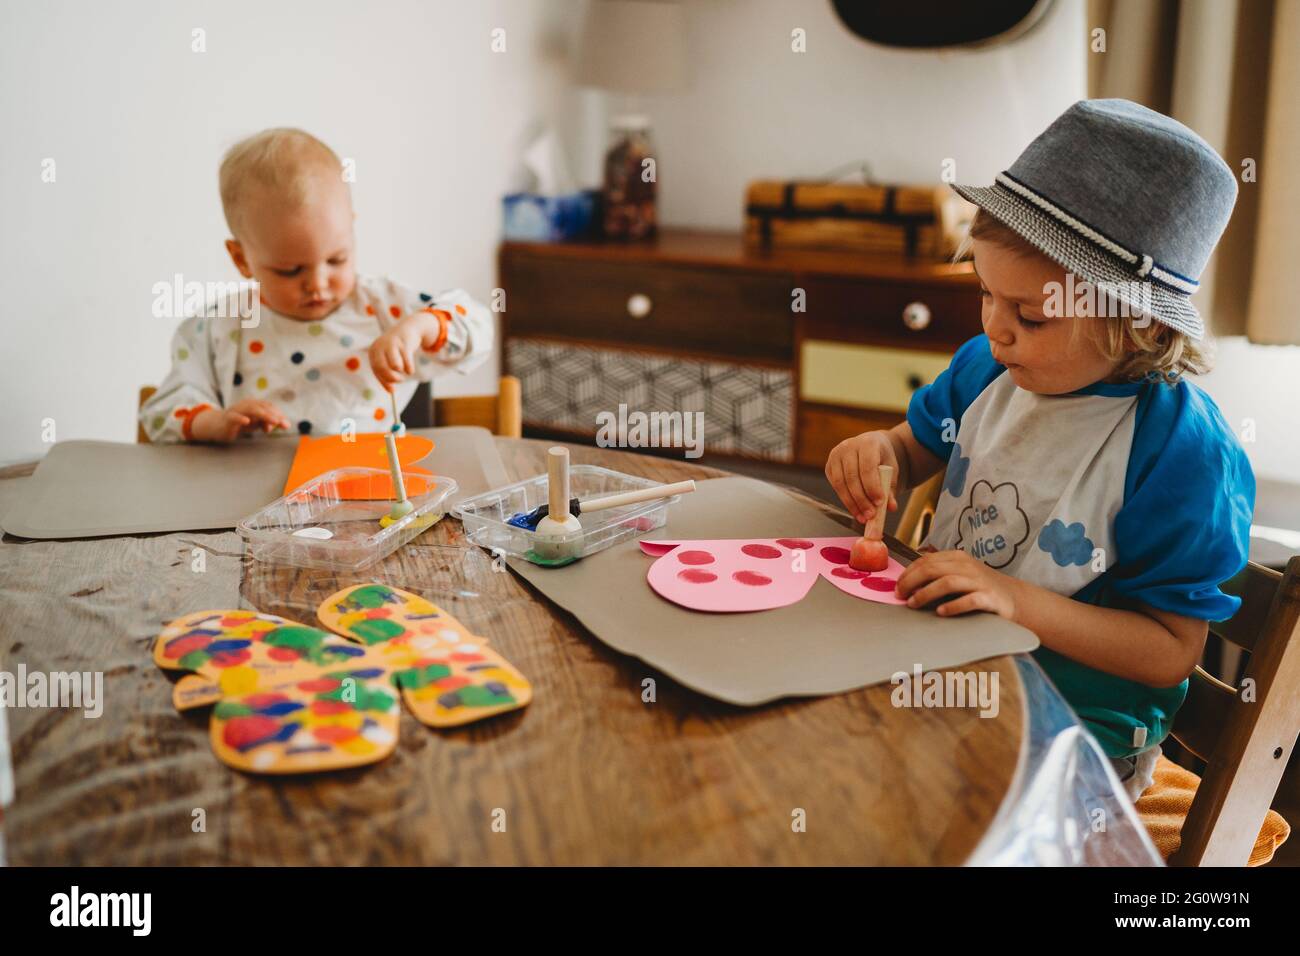 Young children painting butterflies at home being creative and messy Stock Photo